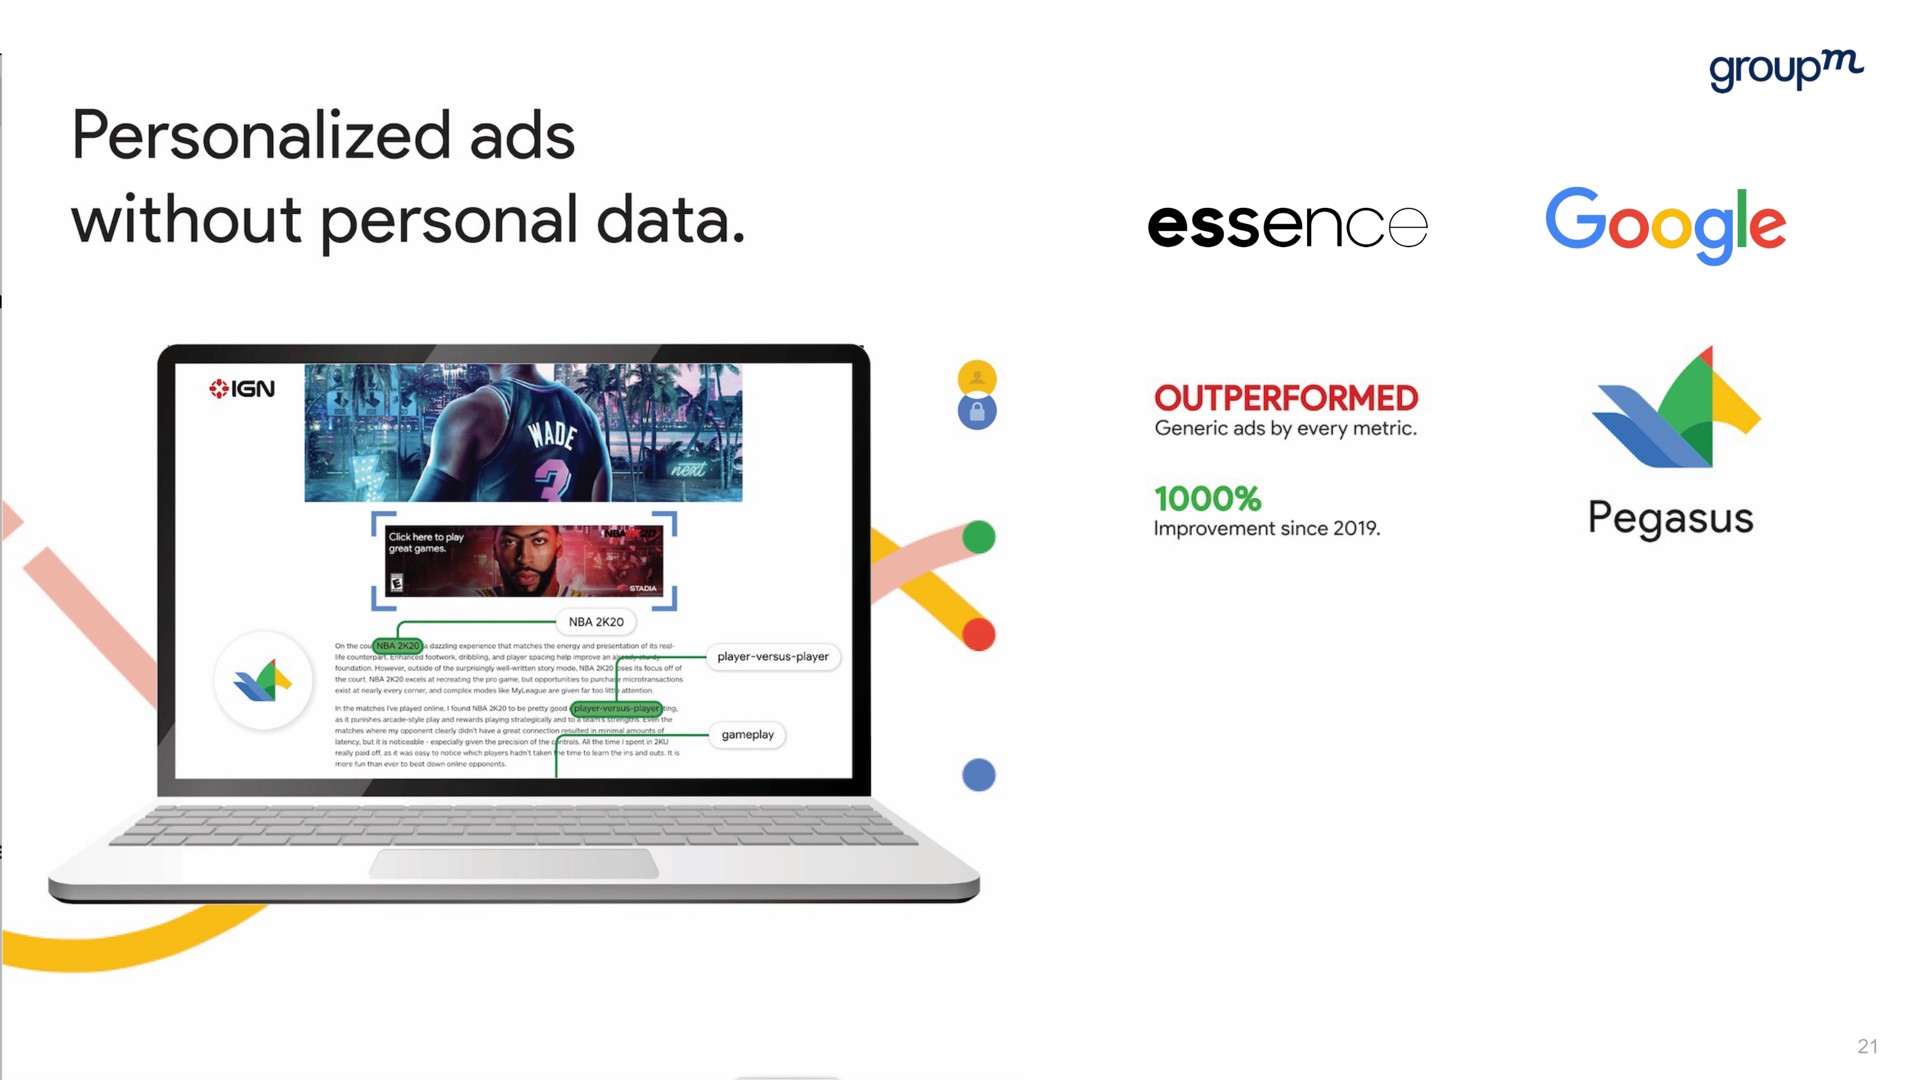 personalized ads without personal data group essence outperformed | WPP